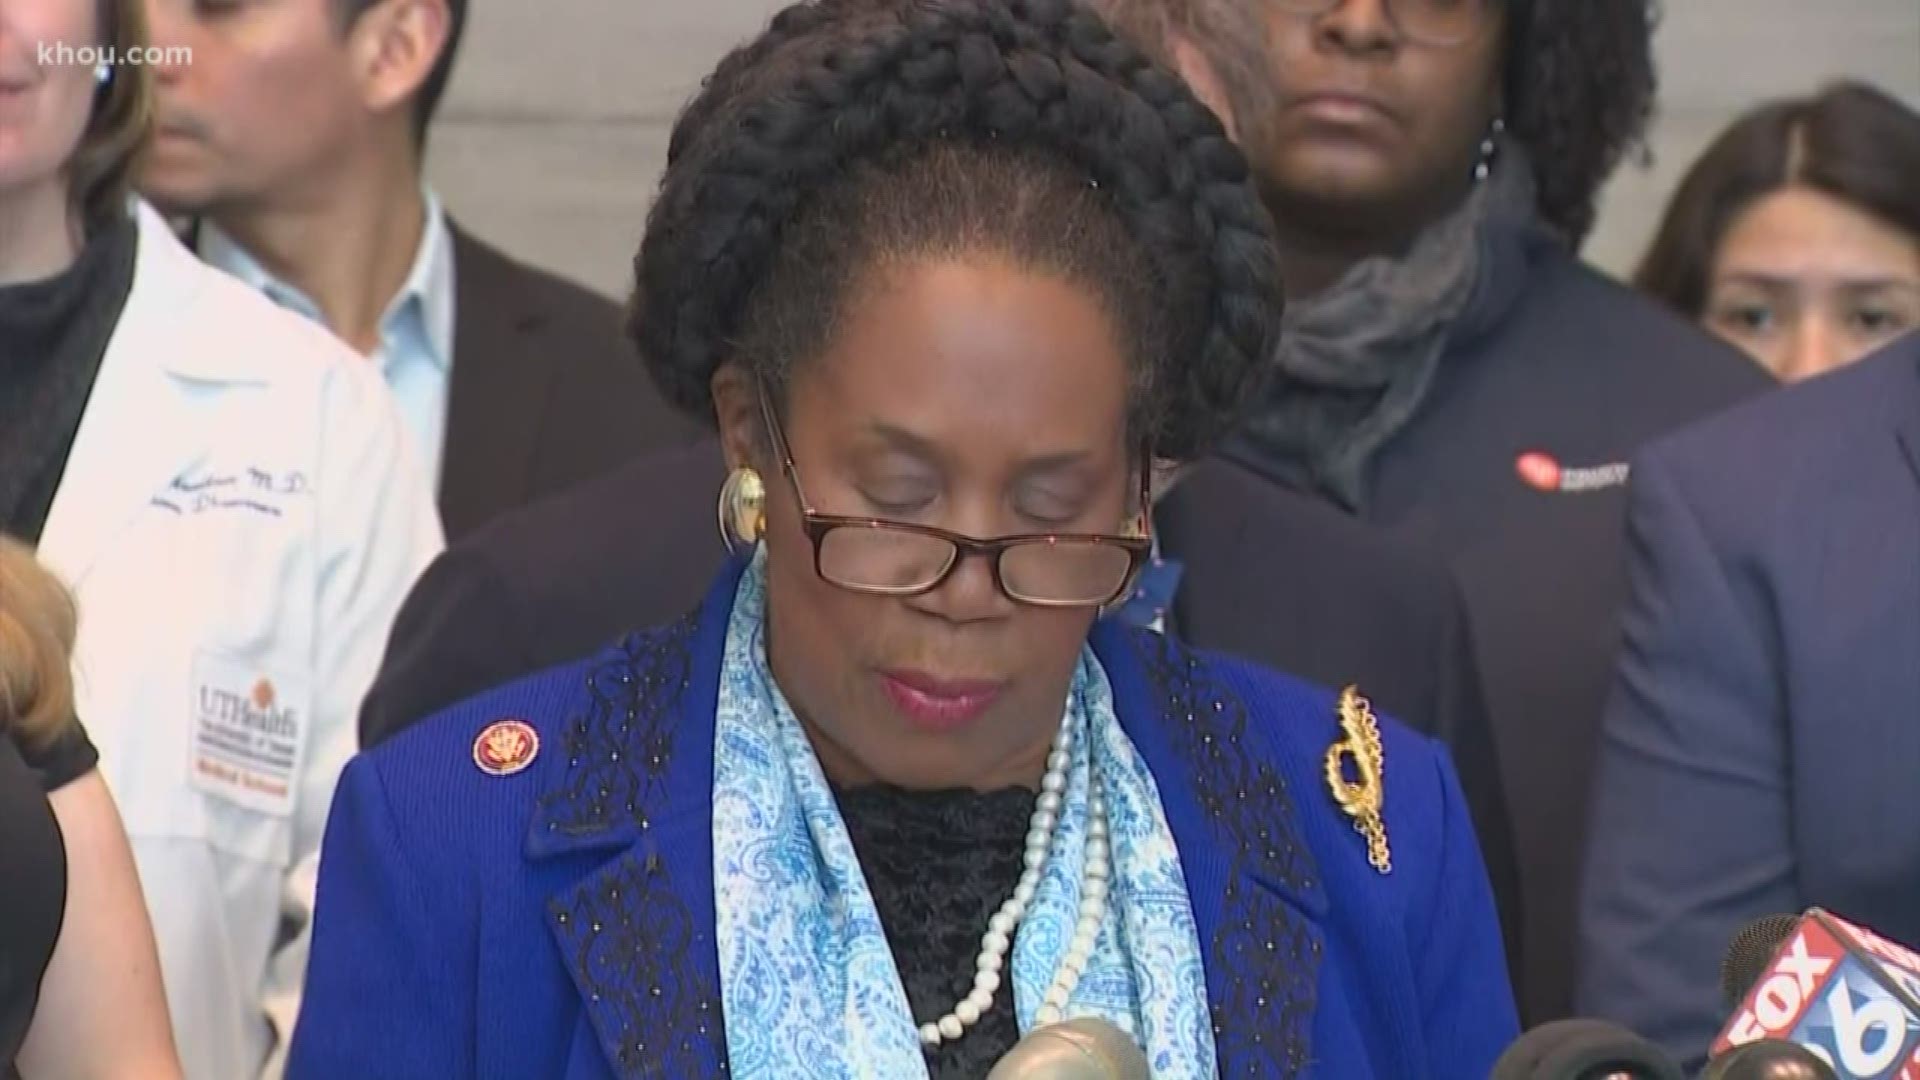 Congresswoman Sheila Jackson Lee is calling out the anti-vaccination movement.